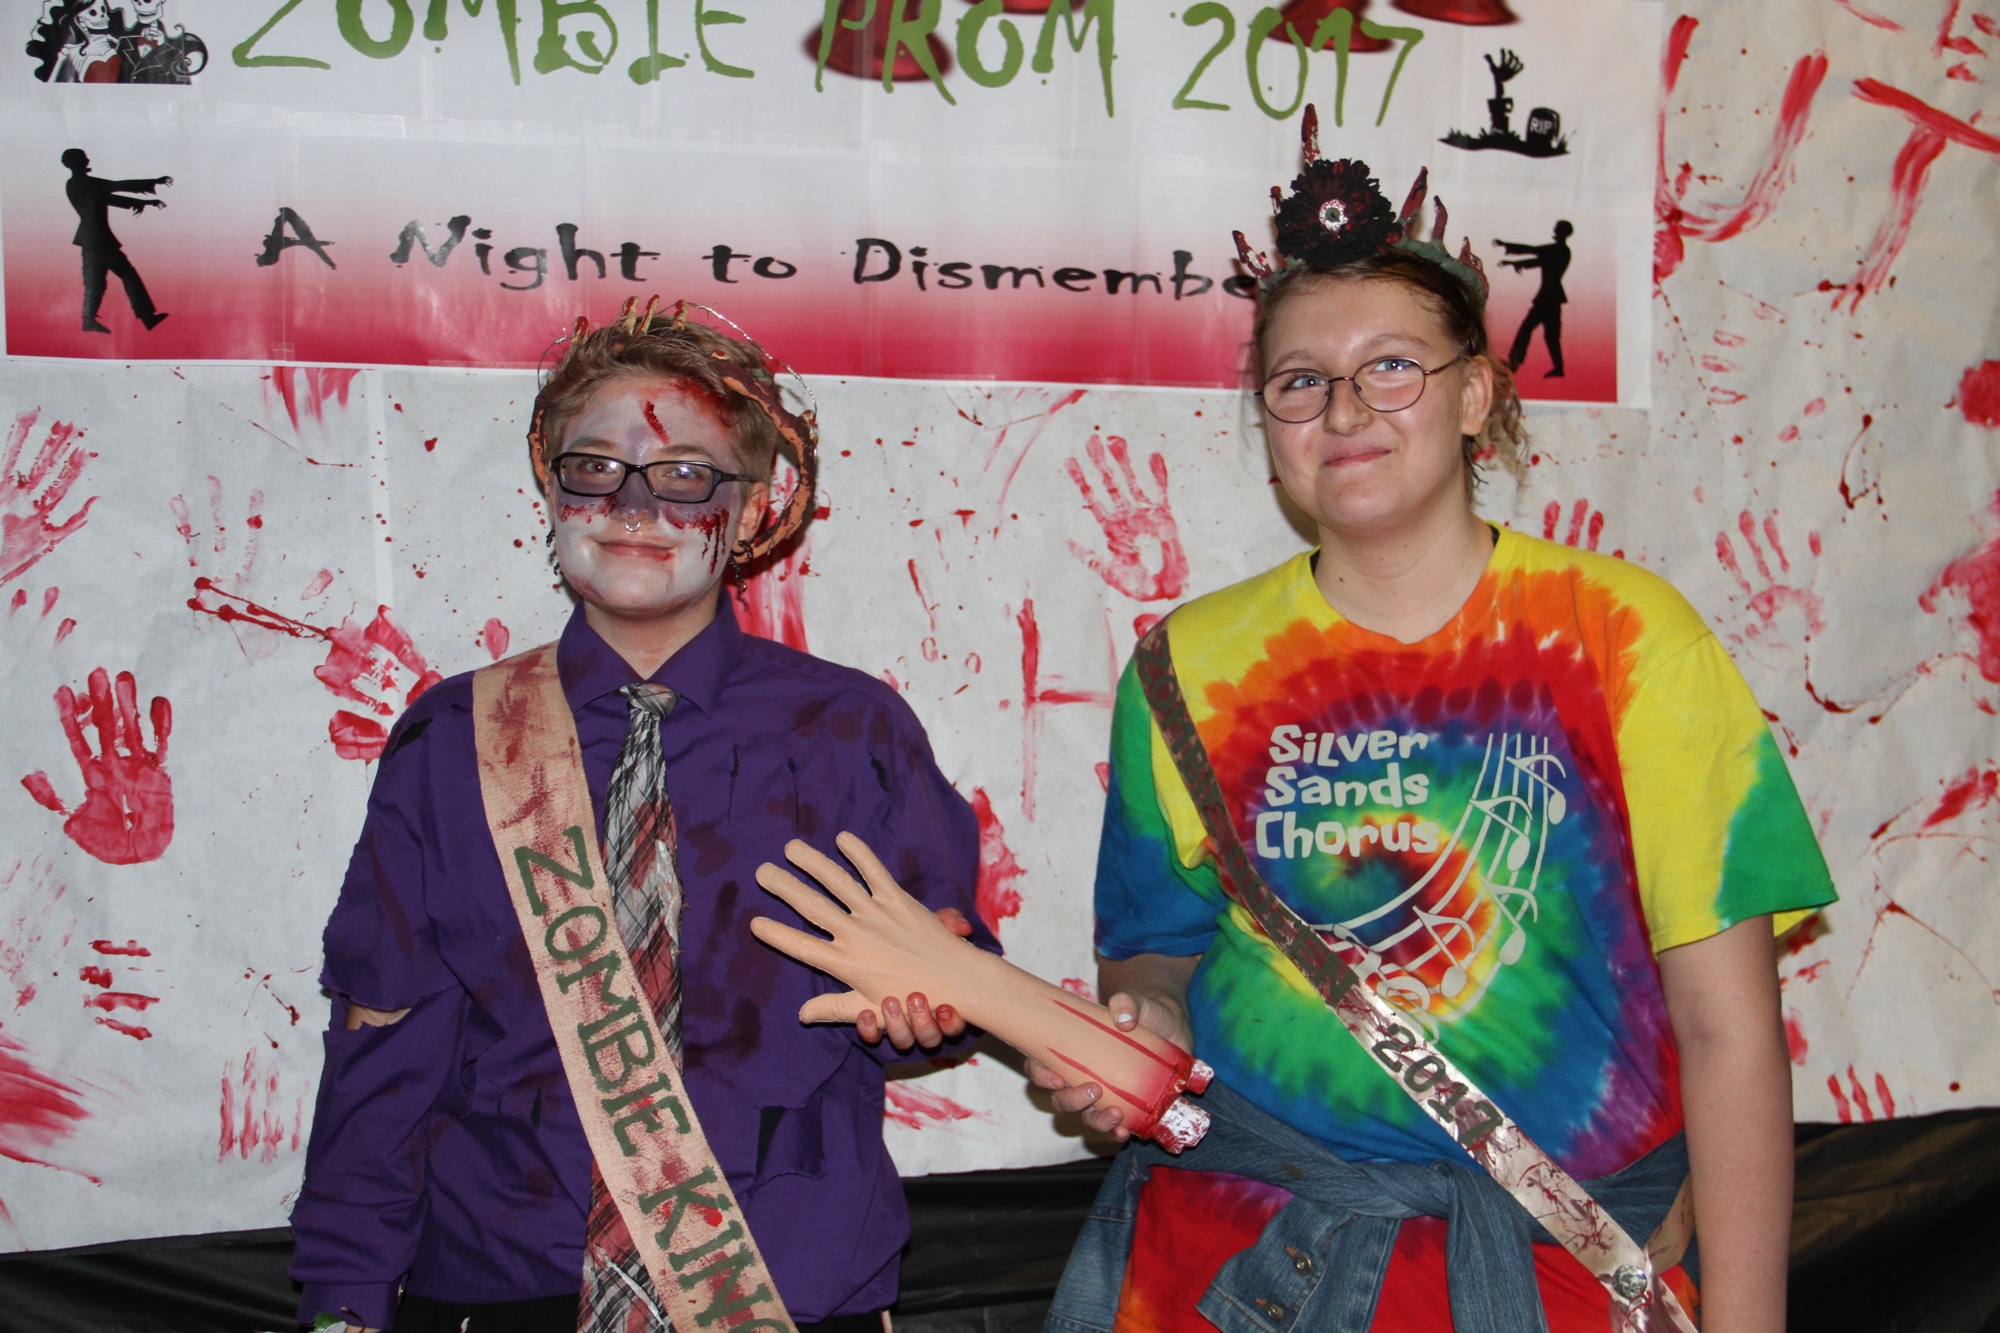 Cody Kleinschmidt and Madison Klamp were named Zombie Prom king and queen. Photo by Nichole Osinski